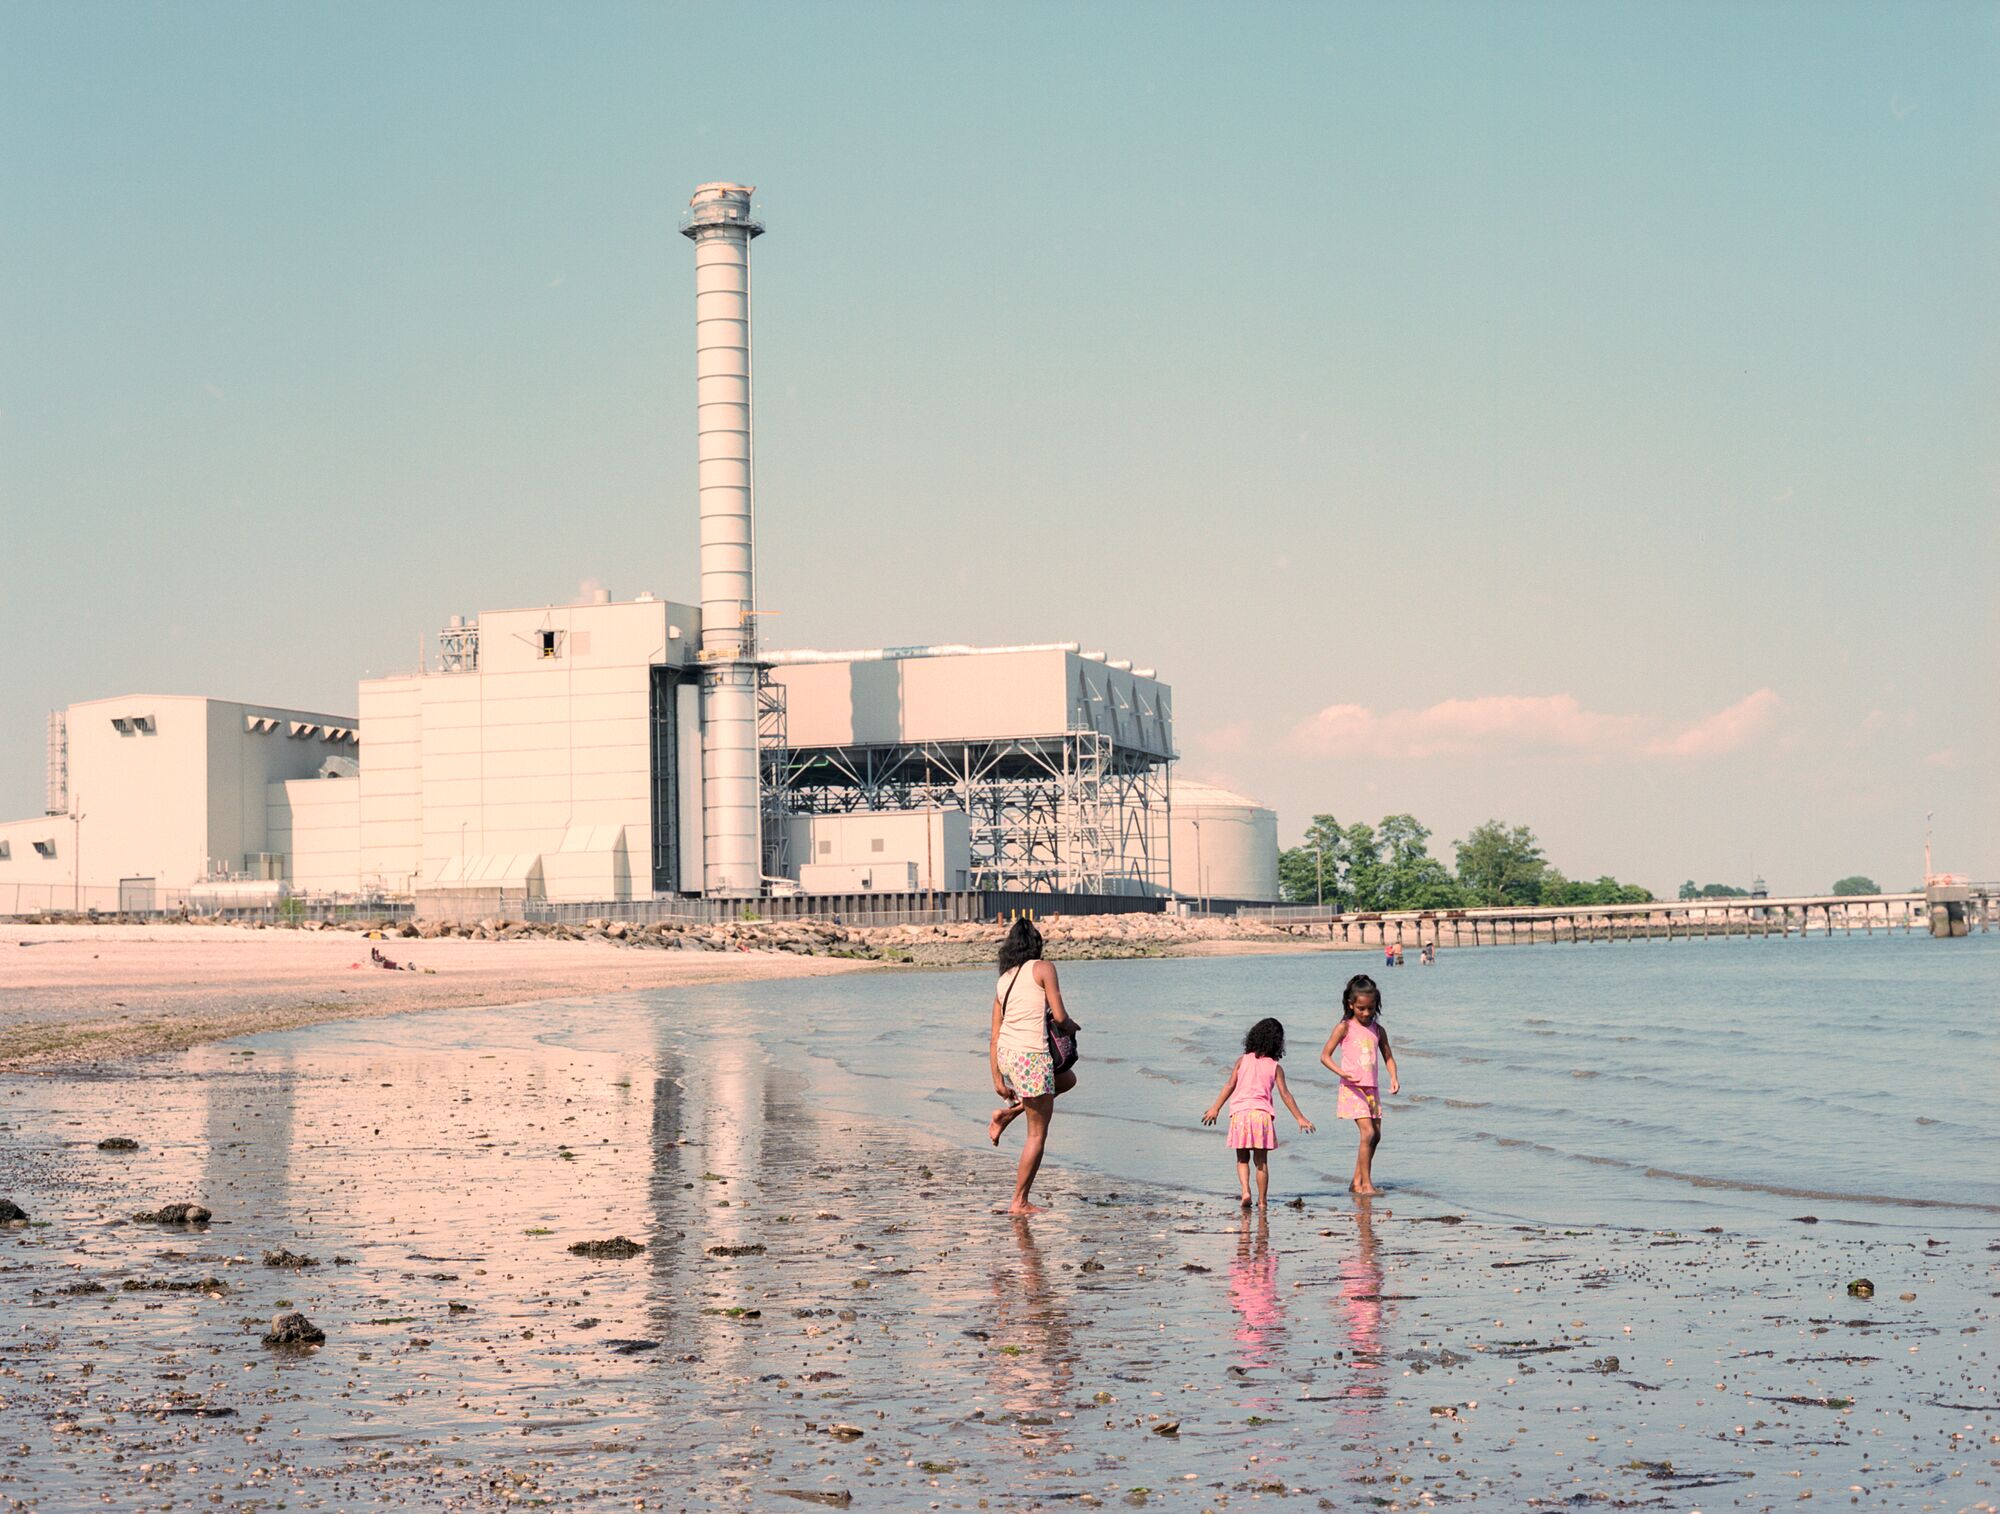 The PSEG plant sits next to Bridgeport Harbor, Conn., July 2020. Community members often come to fish and bring families to enjoy the water.